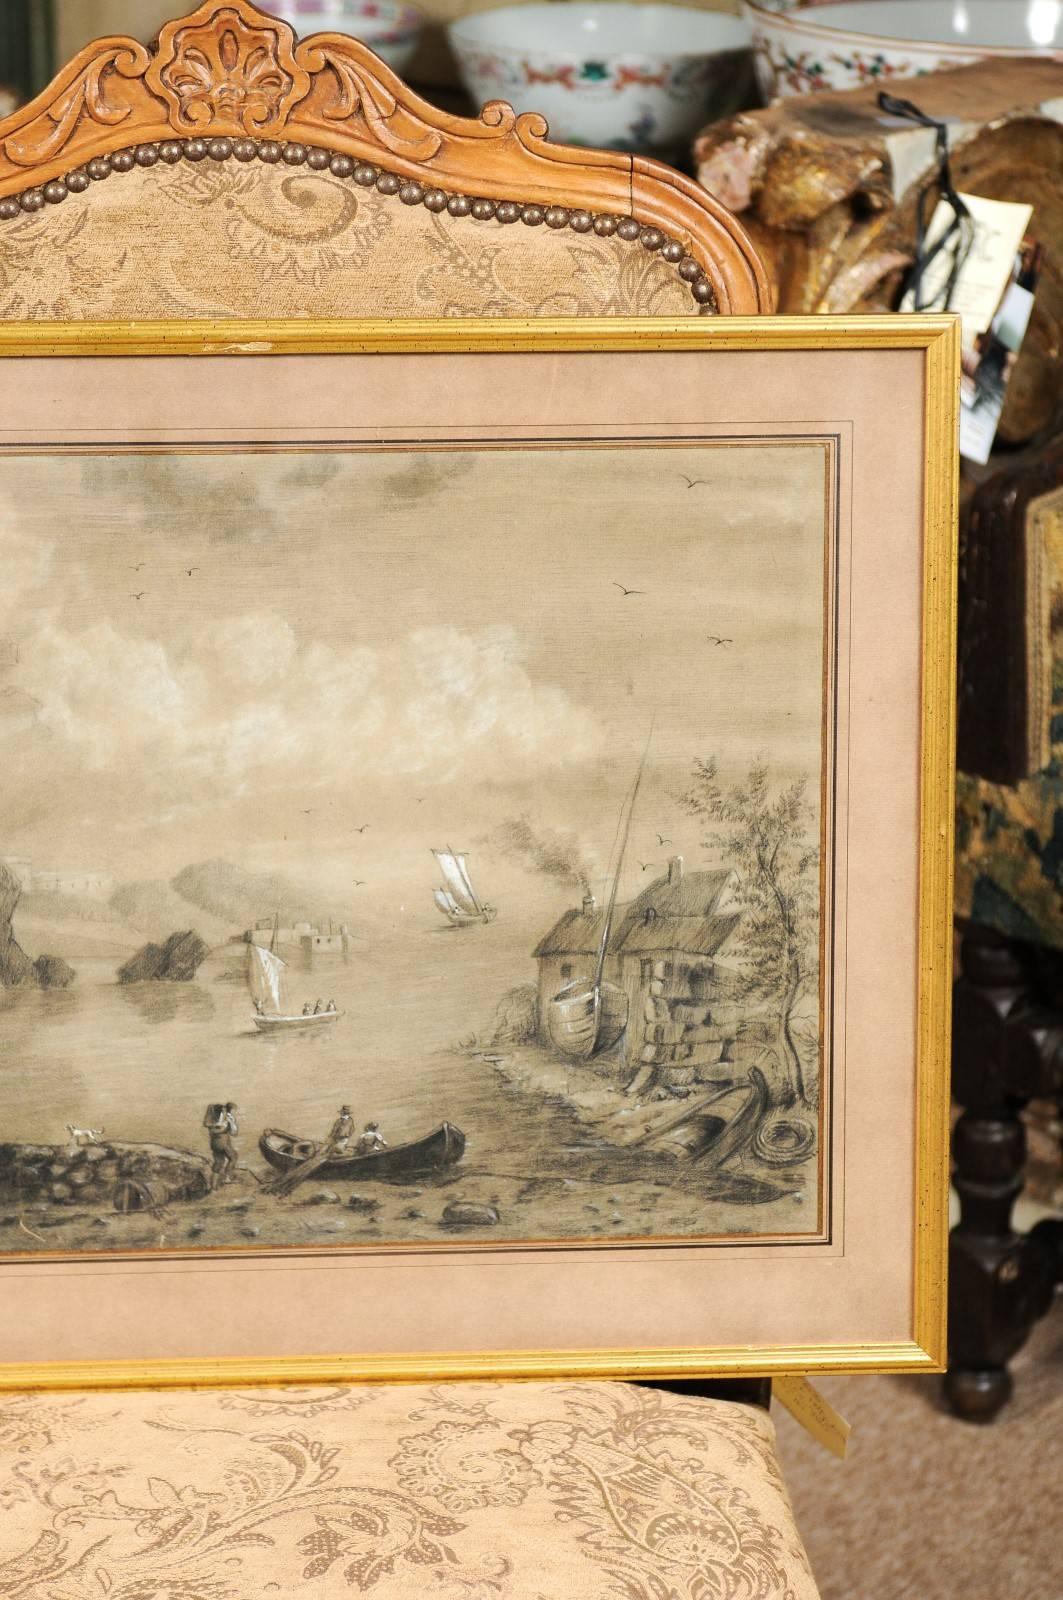 Paper Giltwood Framed 19th Century French Drawing and Watercolor Landscape